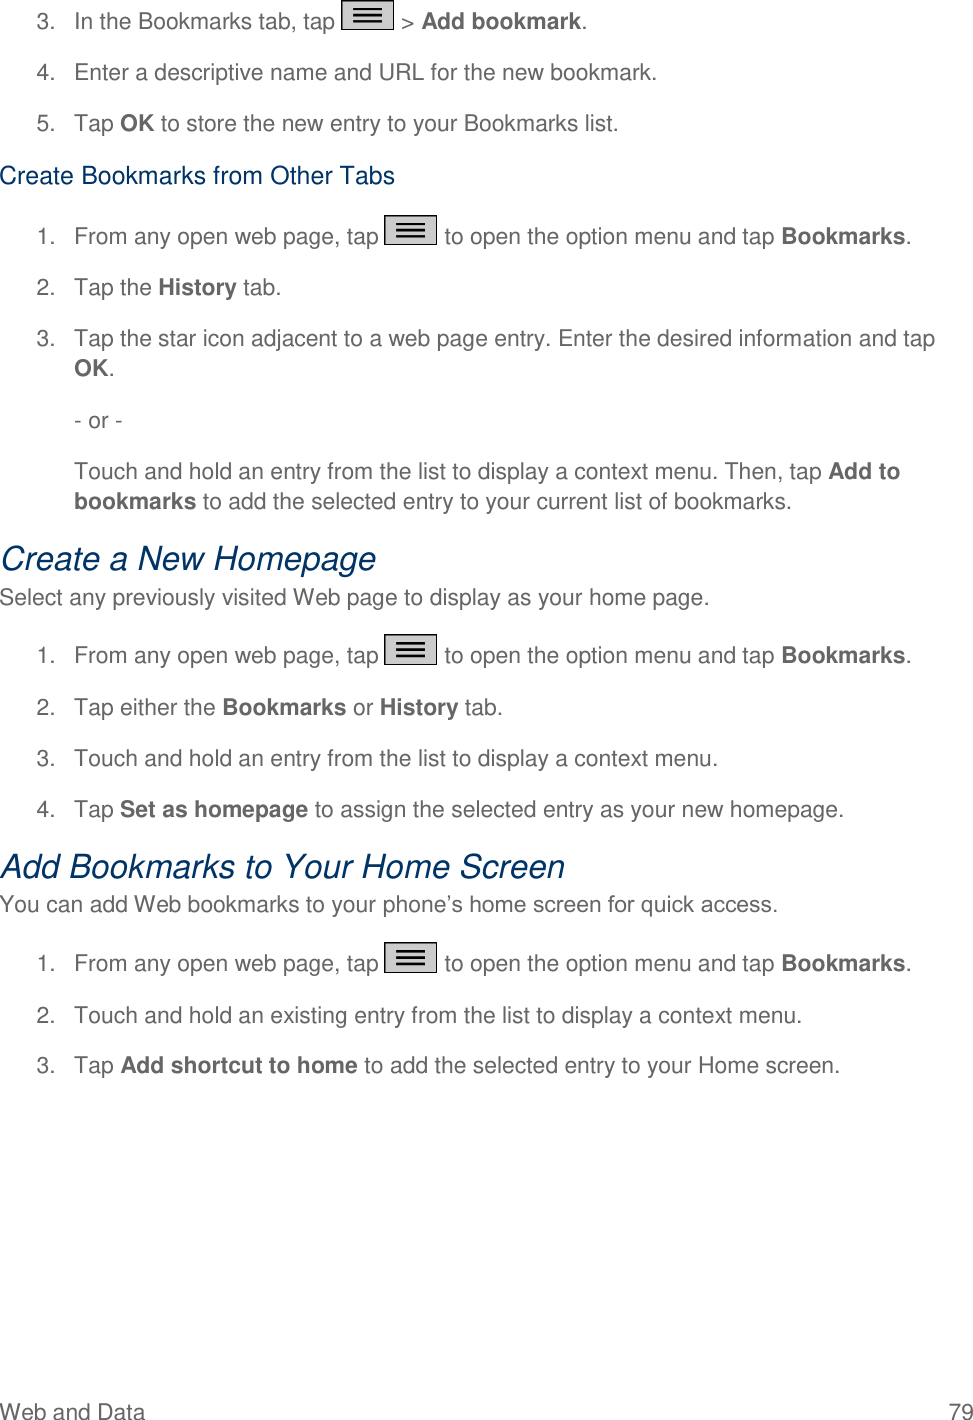 Web and Data  79 3.  In the Bookmarks tab, tap   &gt; Add bookmark.  4.  Enter a descriptive name and URL for the new bookmark.  5.  Tap OK to store the new entry to your Bookmarks list. Create Bookmarks from Other Tabs 1.  From any open web page, tap   to open the option menu and tap Bookmarks.  2.  Tap the History tab.  3.  Tap the star icon adjacent to a web page entry. Enter the desired information and tap OK.  - or -  Touch and hold an entry from the list to display a context menu. Then, tap Add to bookmarks to add the selected entry to your current list of bookmarks. Create a New Homepage Select any previously visited Web page to display as your home page. 1.  From any open web page, tap   to open the option menu and tap Bookmarks.  2.  Tap either the Bookmarks or History tab.  3.  Touch and hold an entry from the list to display a context menu.  4.  Tap Set as homepage to assign the selected entry as your new homepage. Add Bookmarks to Your Home Screen You can add Web bookmarks to your phone‘s home screen for quick access. 1.  From any open web page, tap   to open the option menu and tap Bookmarks.  2.  Touch and hold an existing entry from the list to display a context menu.  3.  Tap Add shortcut to home to add the selected entry to your Home screen. 